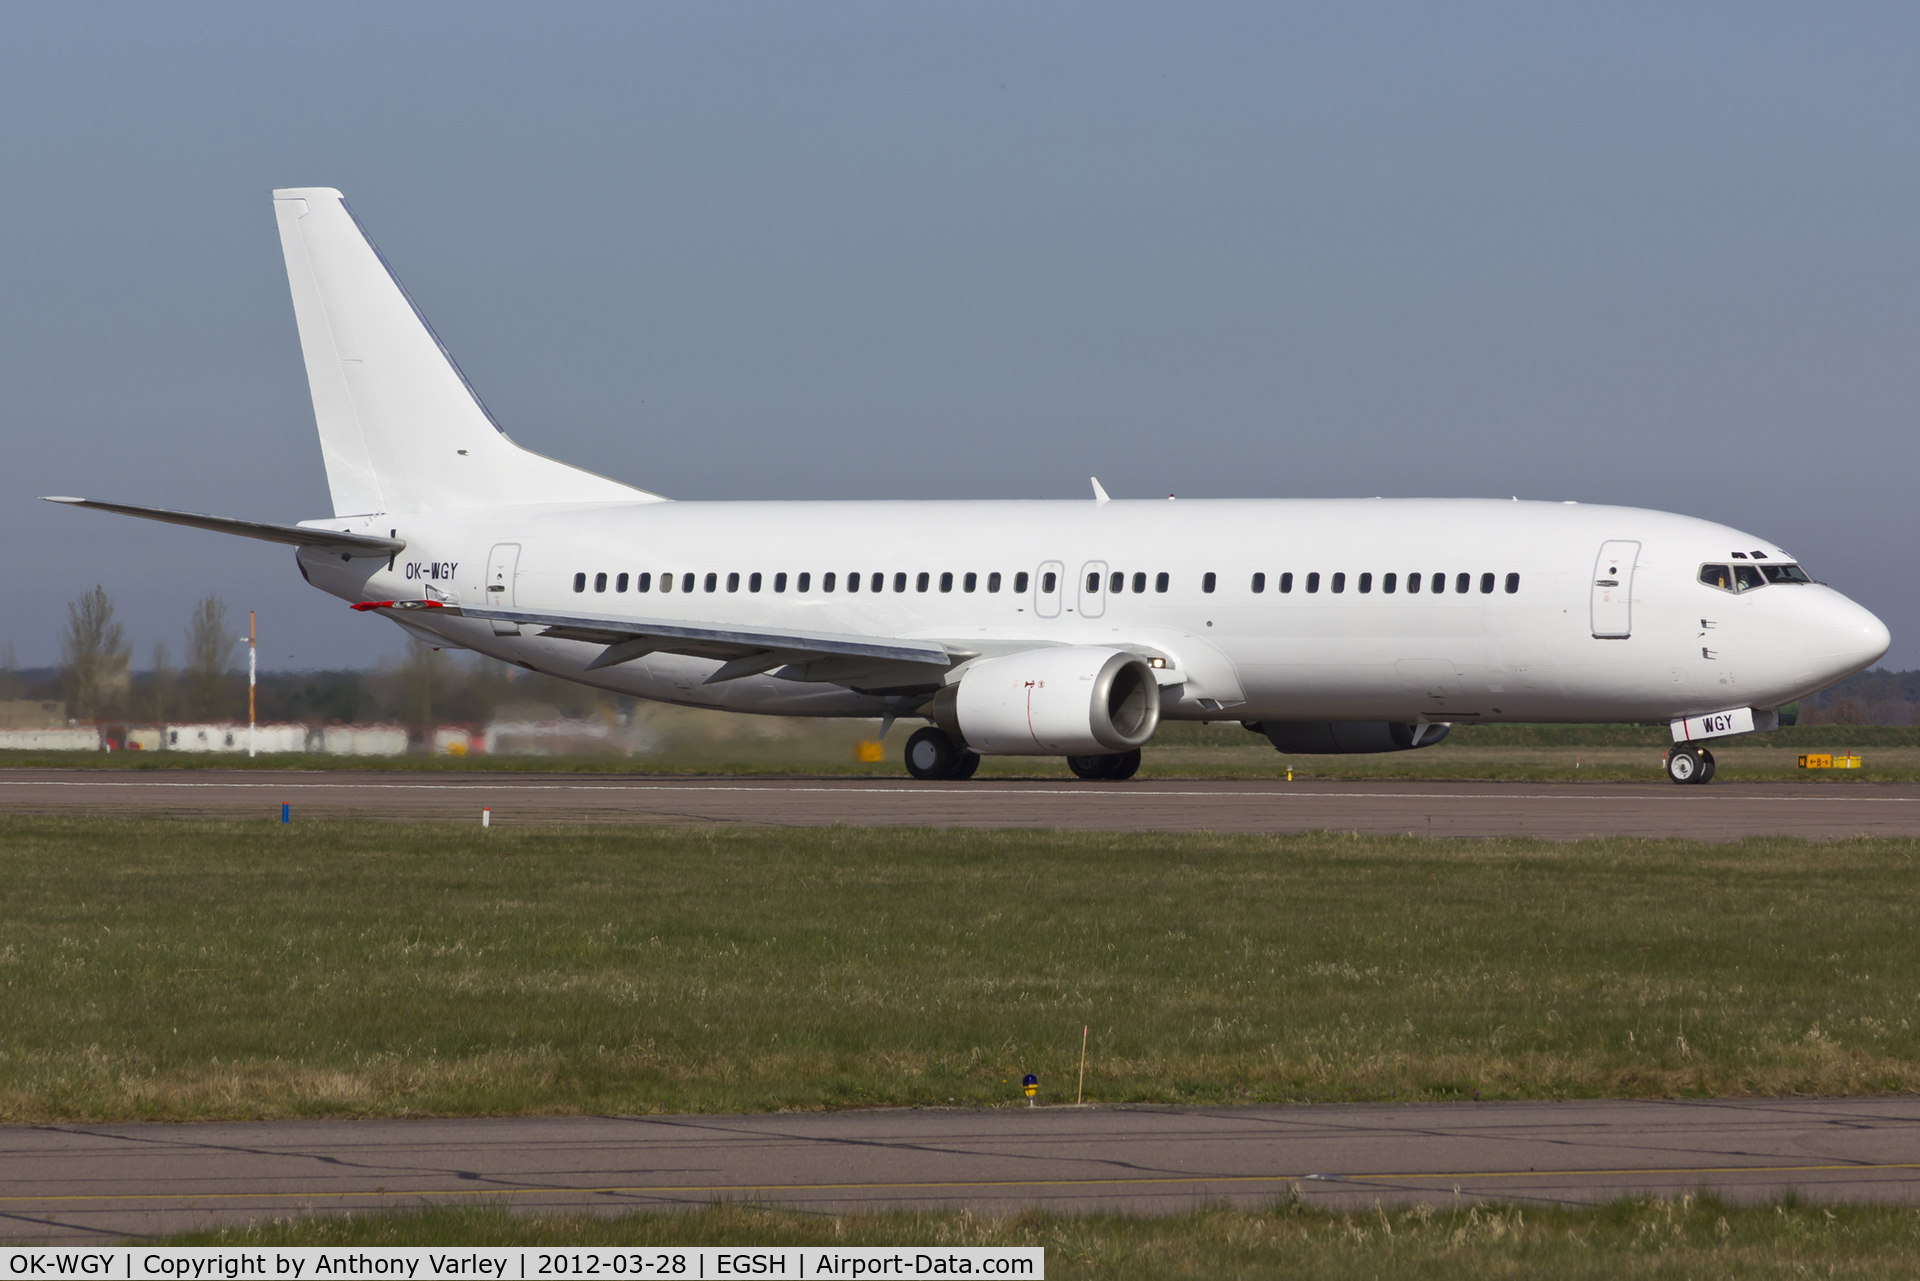 OK-WGY, 1991 Boeing 737-436 C/N 25839, Departing EGSH after spray into an all white C/S.